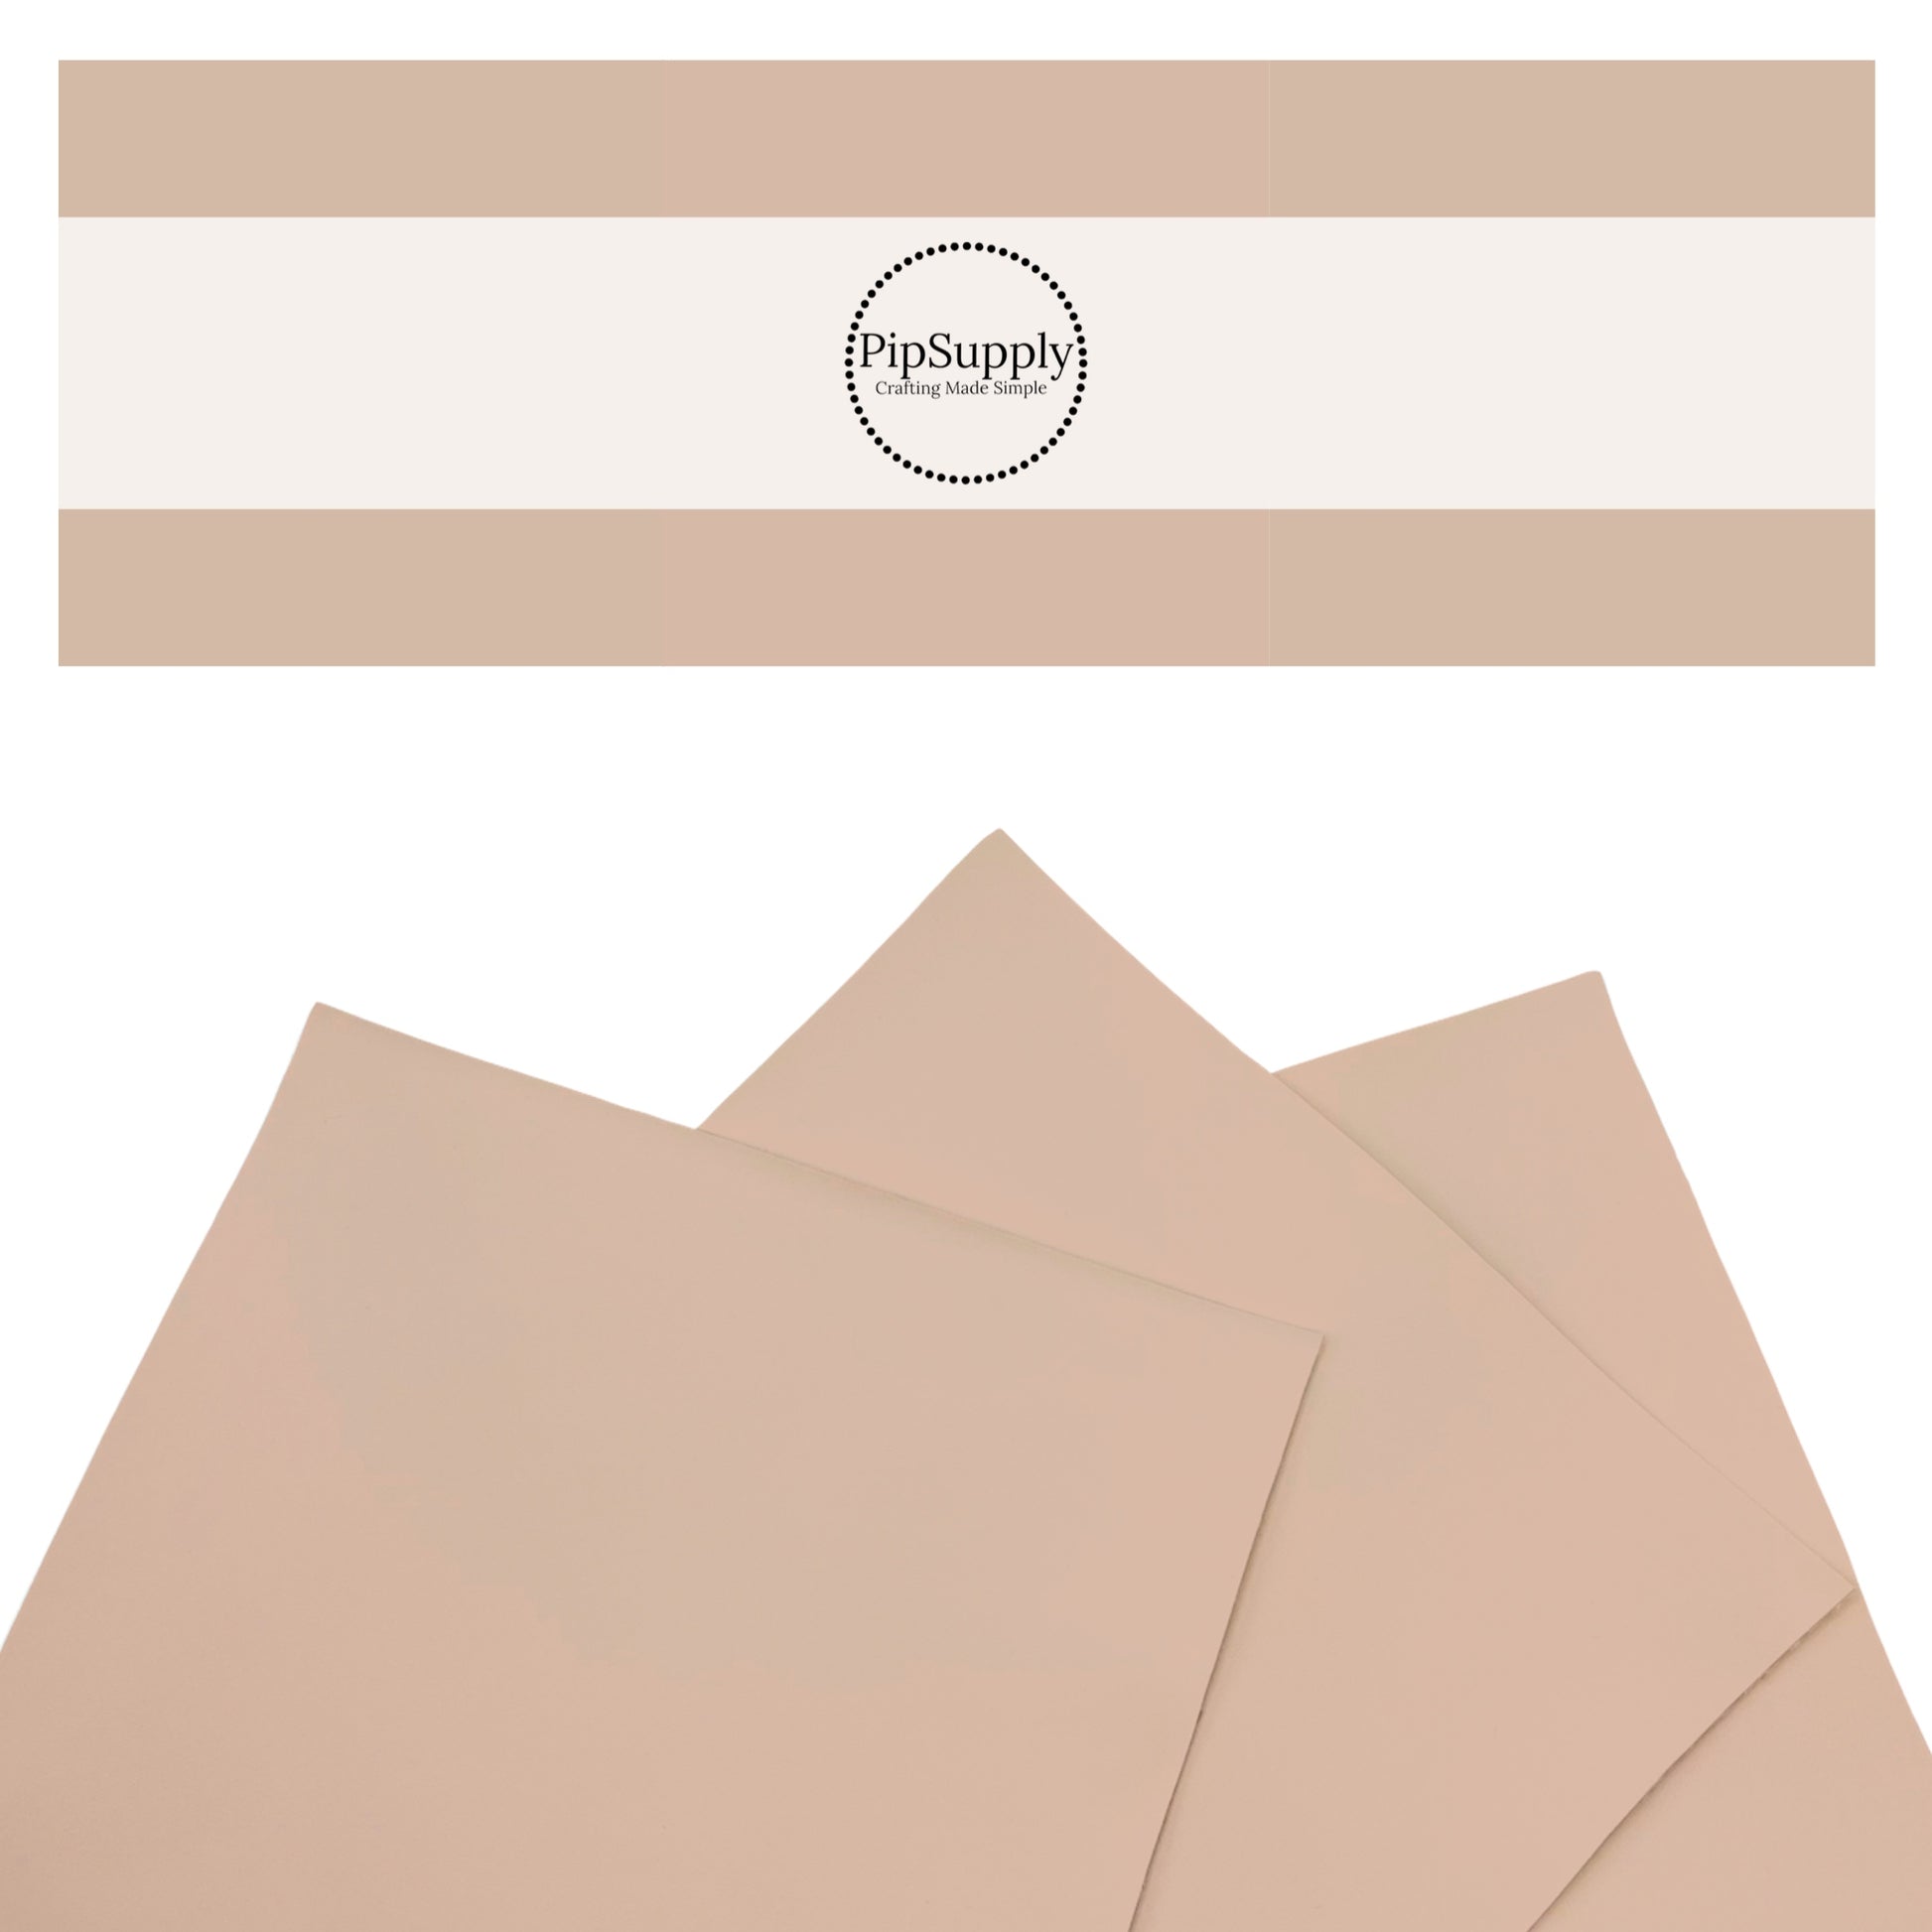 Solid colored smooth faux leather sheets in beige tan.